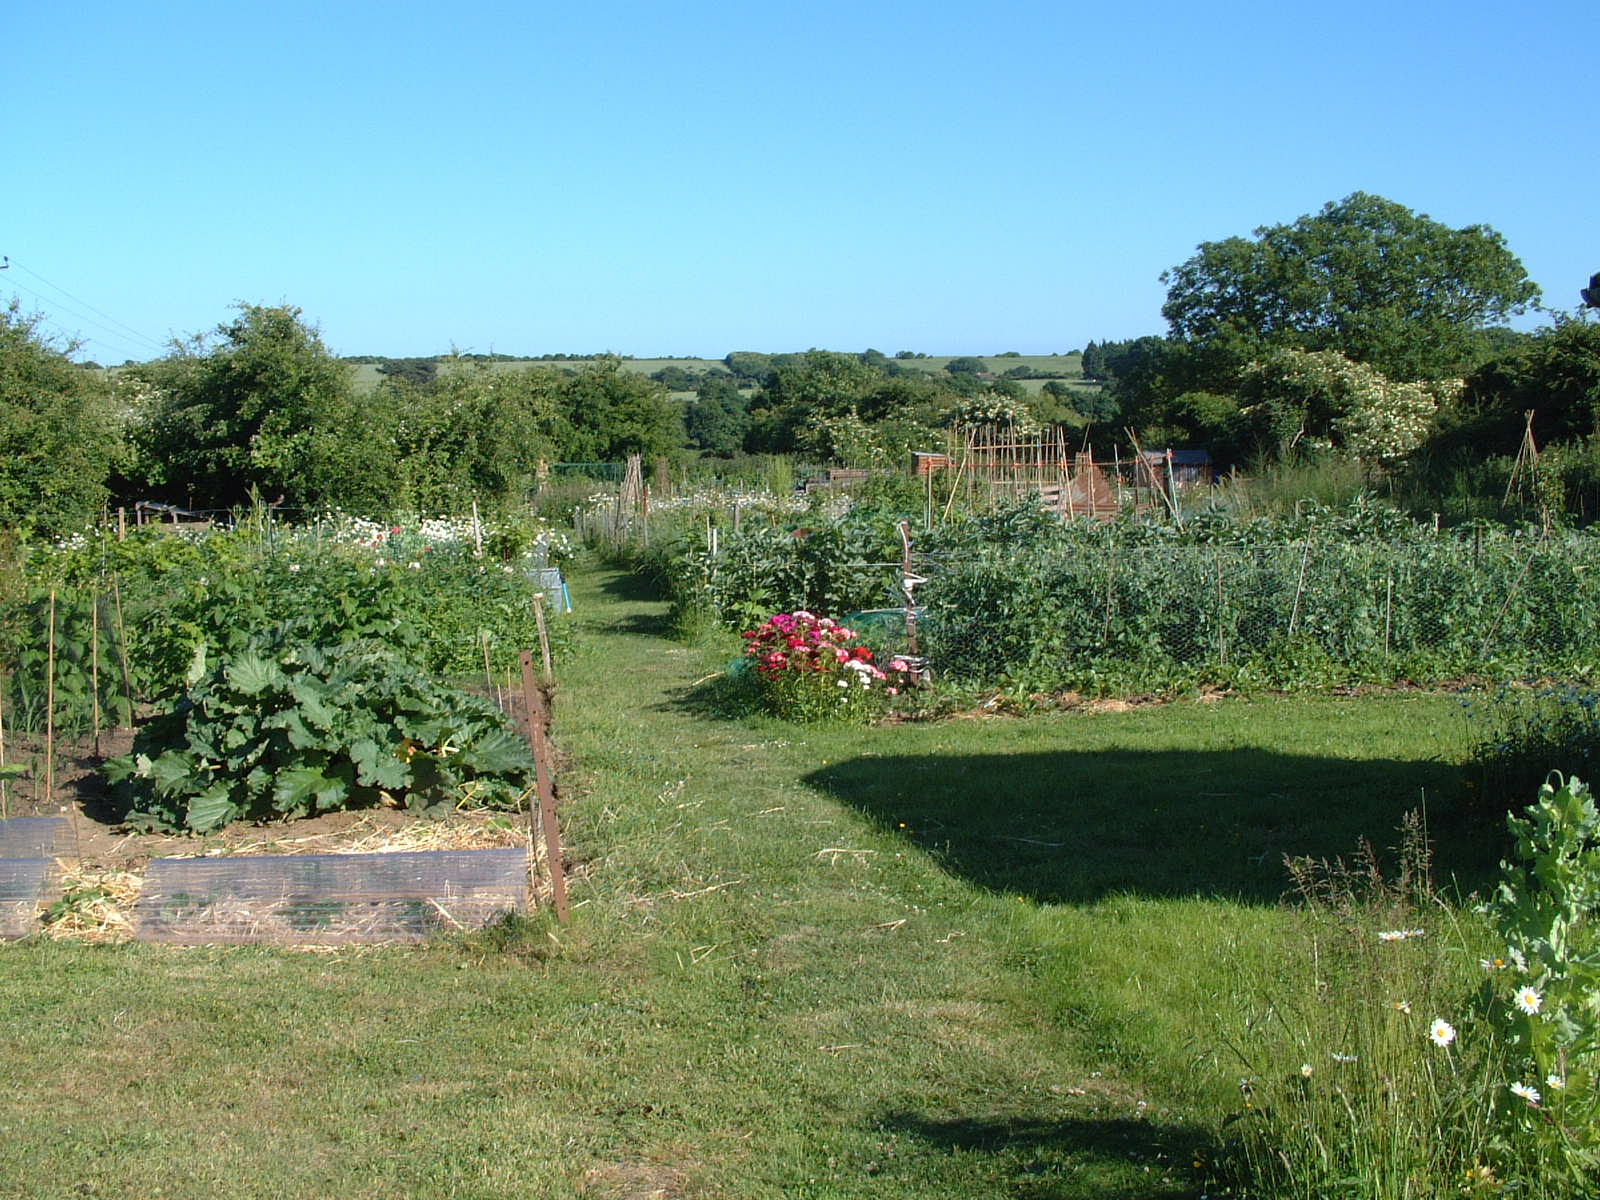 Allotments in summer